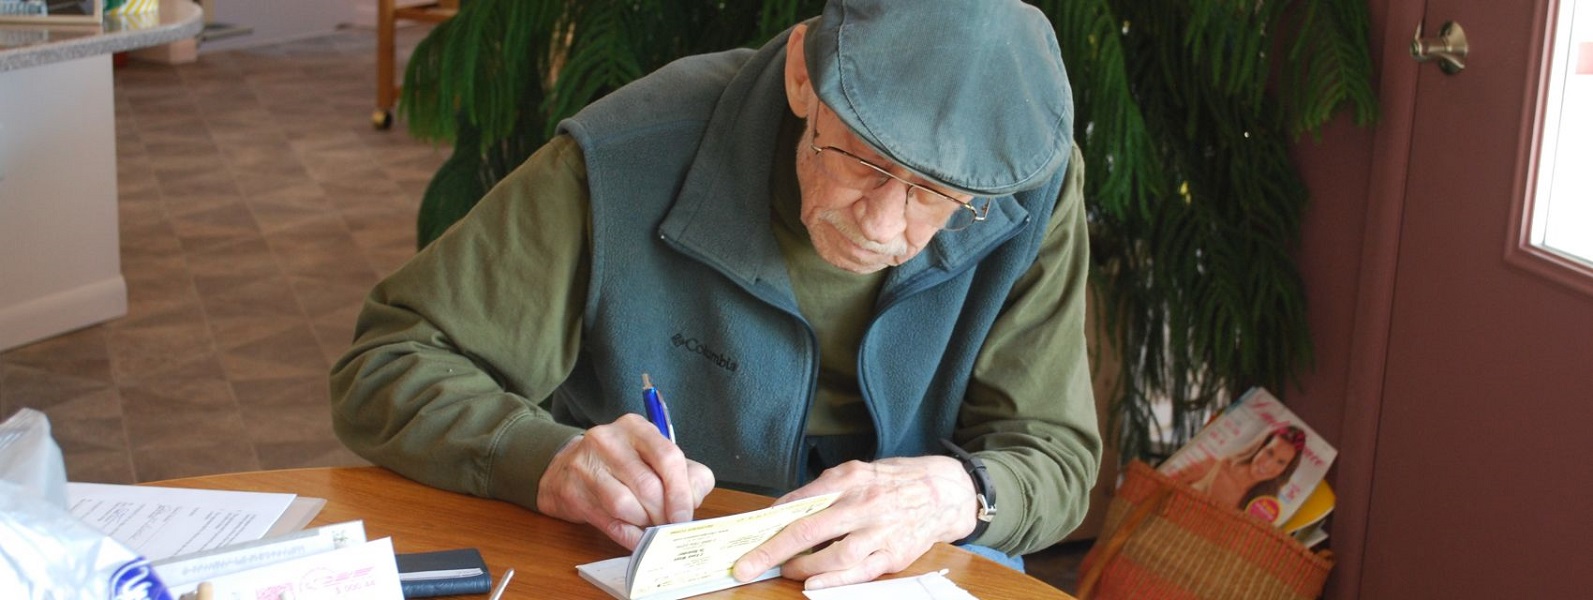 This is an image of Clayton Brockel, KPC's founding director, writing a check to provide for a donation to student scholarship endowments his family supported.